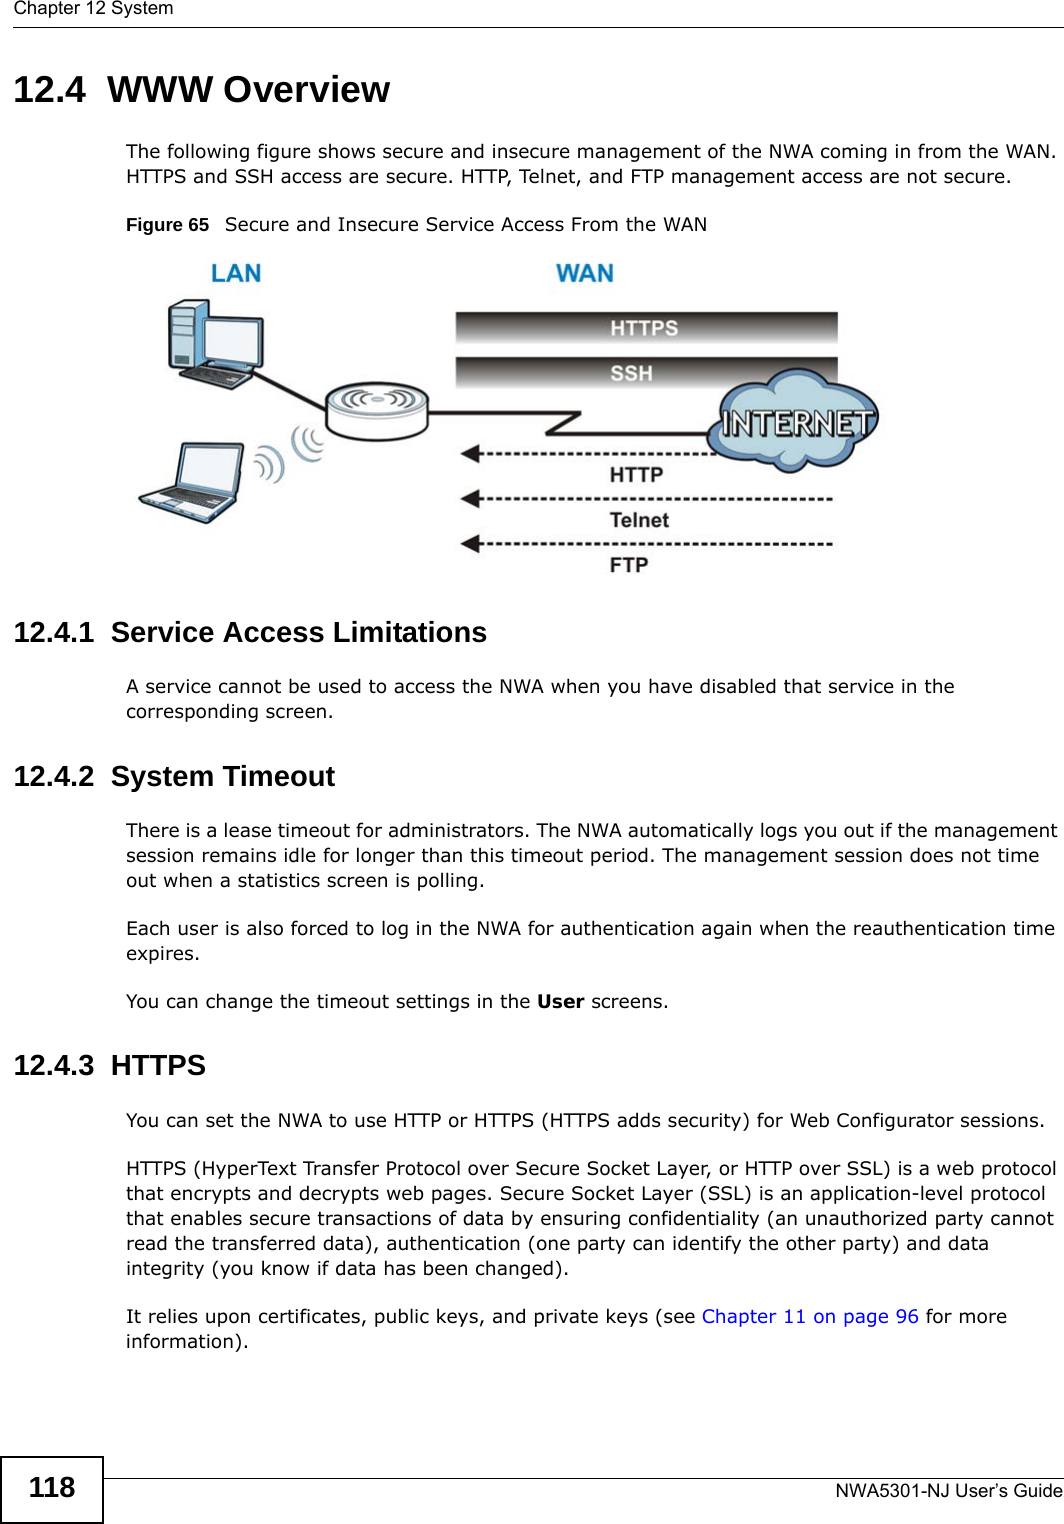 Chapter 12 SystemNWA5301-NJ User’s Guide11812.4  WWW OverviewThe following figure shows secure and insecure management of the NWA coming in from the WAN. HTTPS and SSH access are secure. HTTP, Telnet, and FTP management access are not secure. Figure 65   Secure and Insecure Service Access From the WAN12.4.1  Service Access LimitationsA service cannot be used to access the NWA when you have disabled that service in the corresponding screen.12.4.2  System TimeoutThere is a lease timeout for administrators. The NWA automatically logs you out if the management session remains idle for longer than this timeout period. The management session does not time out when a statistics screen is polling. Each user is also forced to log in the NWA for authentication again when the reauthentication time expires. You can change the timeout settings in the User screens.12.4.3  HTTPSYou can set the NWA to use HTTP or HTTPS (HTTPS adds security) for Web Configurator sessions. HTTPS (HyperText Transfer Protocol over Secure Socket Layer, or HTTP over SSL) is a web protocol that encrypts and decrypts web pages. Secure Socket Layer (SSL) is an application-level protocol that enables secure transactions of data by ensuring confidentiality (an unauthorized party cannot read the transferred data), authentication (one party can identify the other party) and data integrity (you know if data has been changed). It relies upon certificates, public keys, and private keys (see Chapter 11 on page 96 for more information).